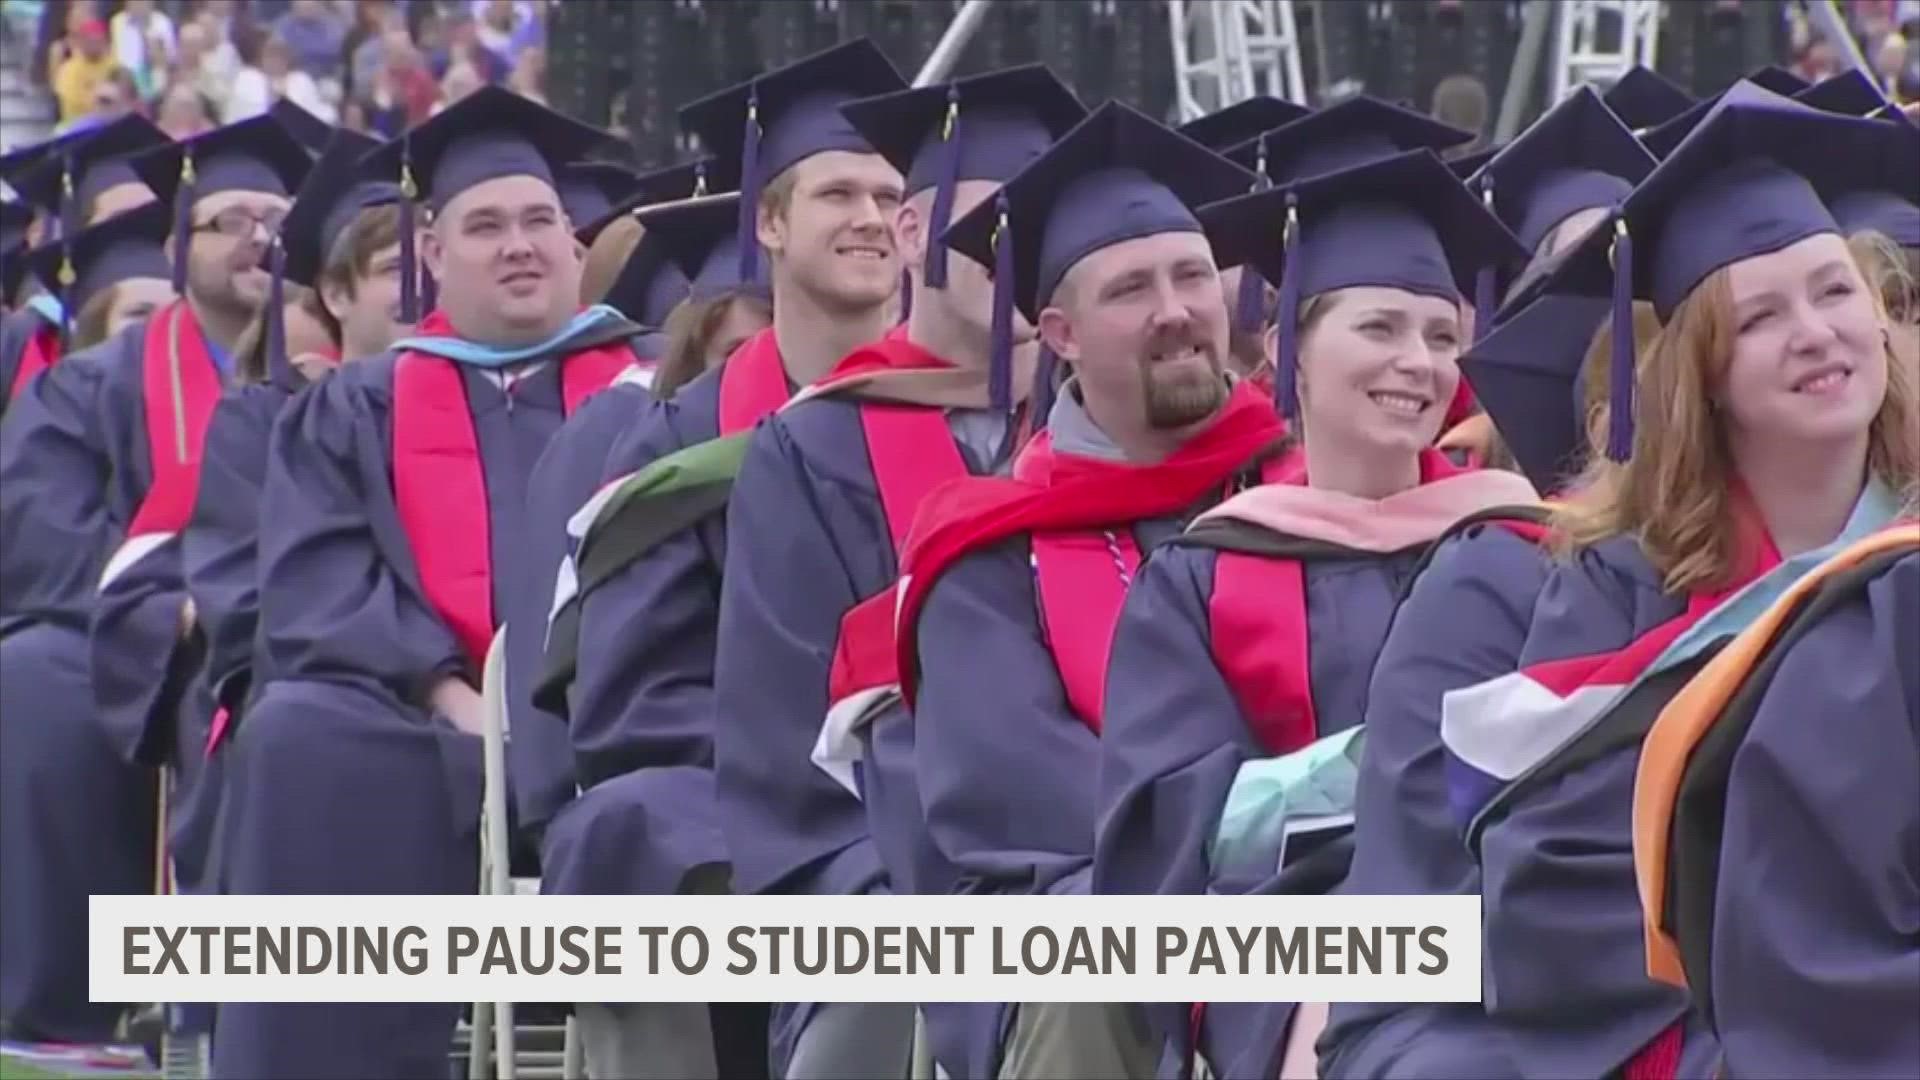 The U.S. Department of Education said this will be the "final extension" of the freeze on student loan payments prompted by the COVID-19 pandemic.